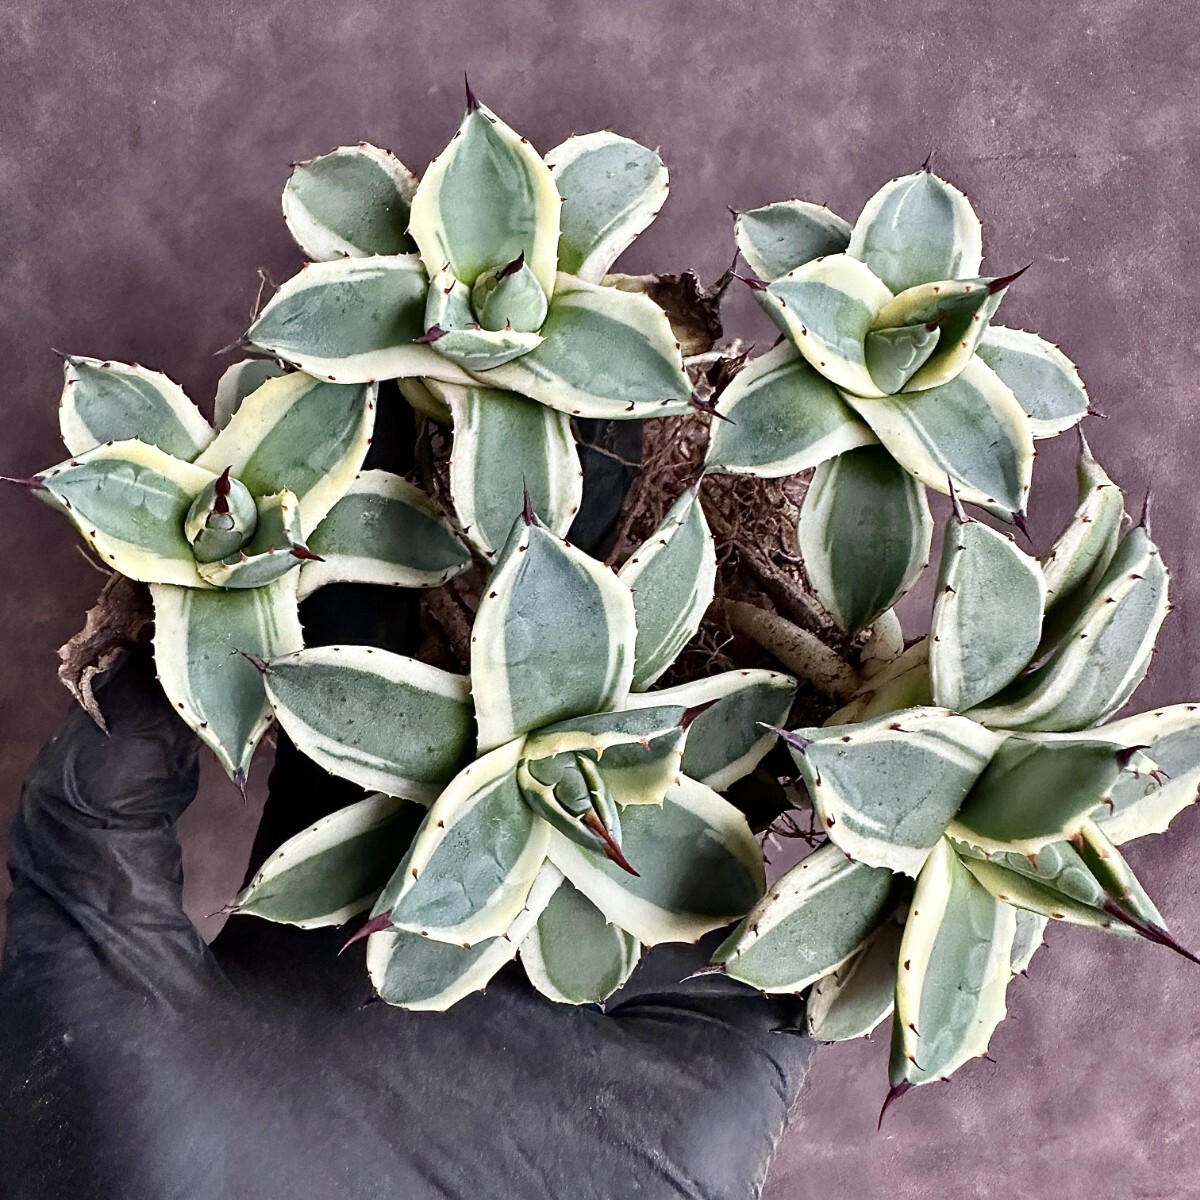 [Lj_plants]W487 succulent plant agave a pra na-ta cream spike me Rico .. wheel .5 stock including in a package 